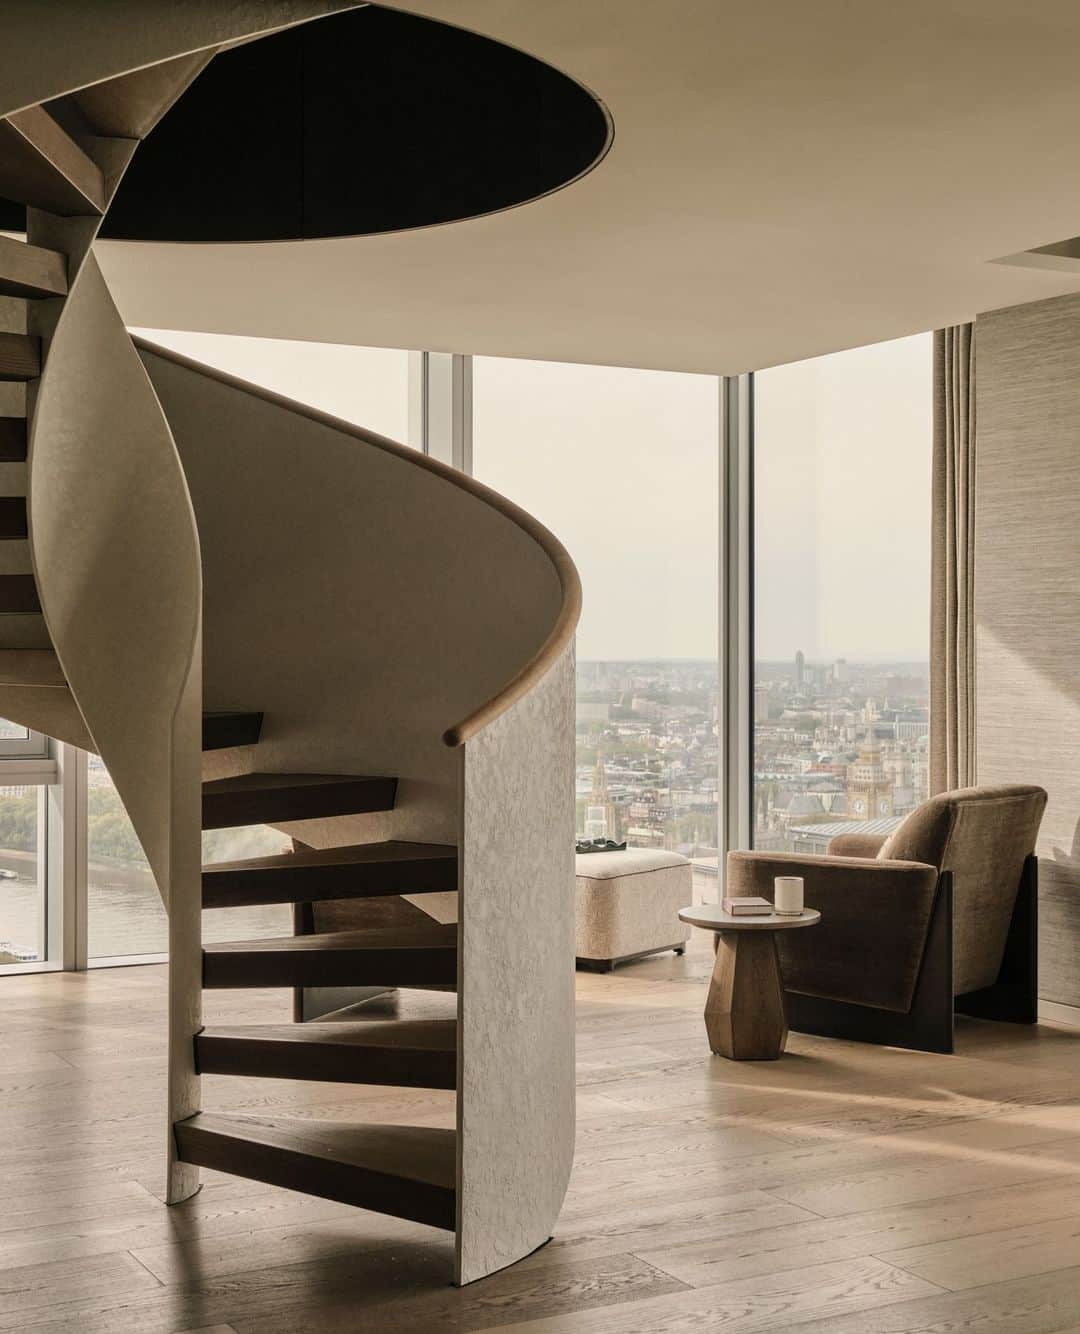 Wallpaperのインスタグラム：「When it comes to London views, it is hard to get more iconic than the One Casson Square penthouse. Vistas of The Shard from your bathtub? The London Eye shimmering in the background as you entertain your guests? Breakfast coffee while gazing at the Houses of Parliament? Check, check, check. And now, the expansive residence in London's South Bank has just revealed its new, specially commissioned interiors by @portiafoxdesign. ⁠ ⁠ 'By capitalising on the extraordinary views across the London skyline, which take in every recognisable landmark, as our main source of inspiration, we have cultivated a space that consistently complements its surroundings,' says Fox. 'Here, the owner can still appreciate scenes of the urban bustle outside the apartment whilst also enjoying being above it all. The penthouse has a unique feel that is part New York high-rise sophistication and part a hub of culture and creativity that so defines this stretch of the South Bank.'⁠ ⁠ To learn more about the design, head to the link in bio. ⁠ ⁠ 🖋️: Ellie Stathaki ⁠ 📷️: Ben Anders⁠ ⁠ #wallpapermagazine #onecassonsquare #penthouse #londonpenthouse #theshard #londoneye #iconiclondonbuidlings #londonbuildings #londonlandmarks #londonviews #architecture #interiordesign」